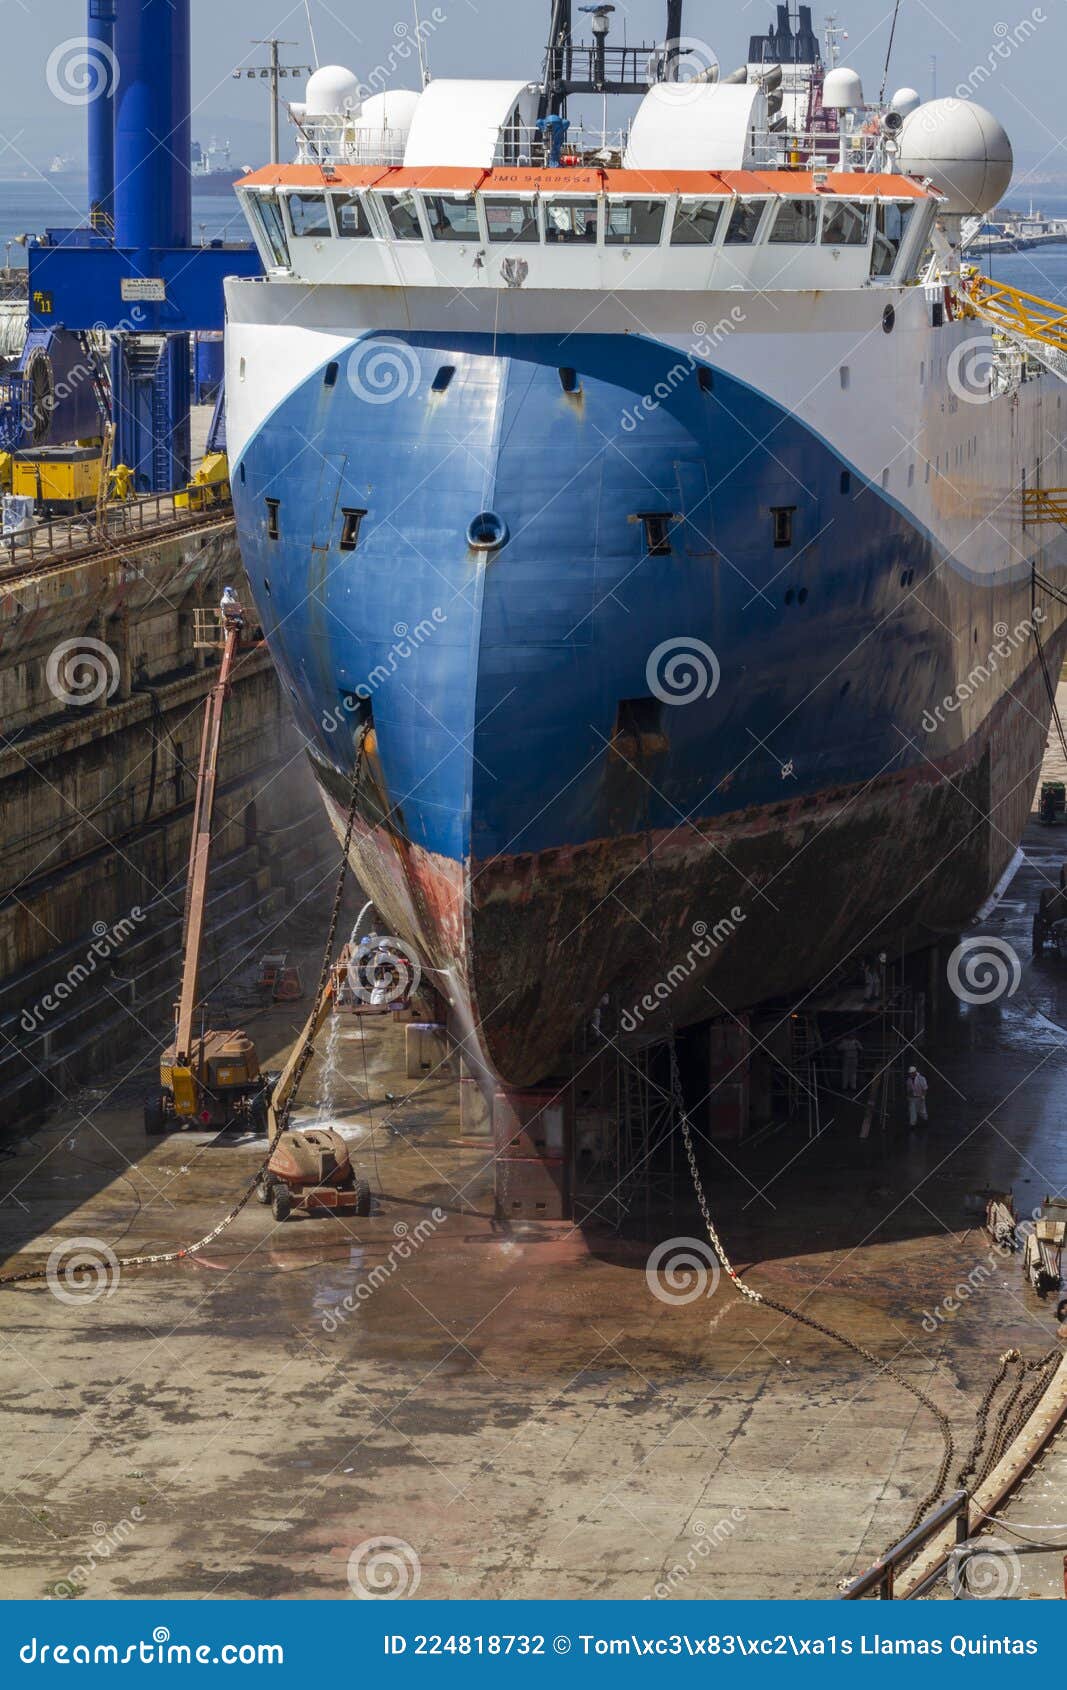 workers cleaning the hull of a merchant ship in the dry dock